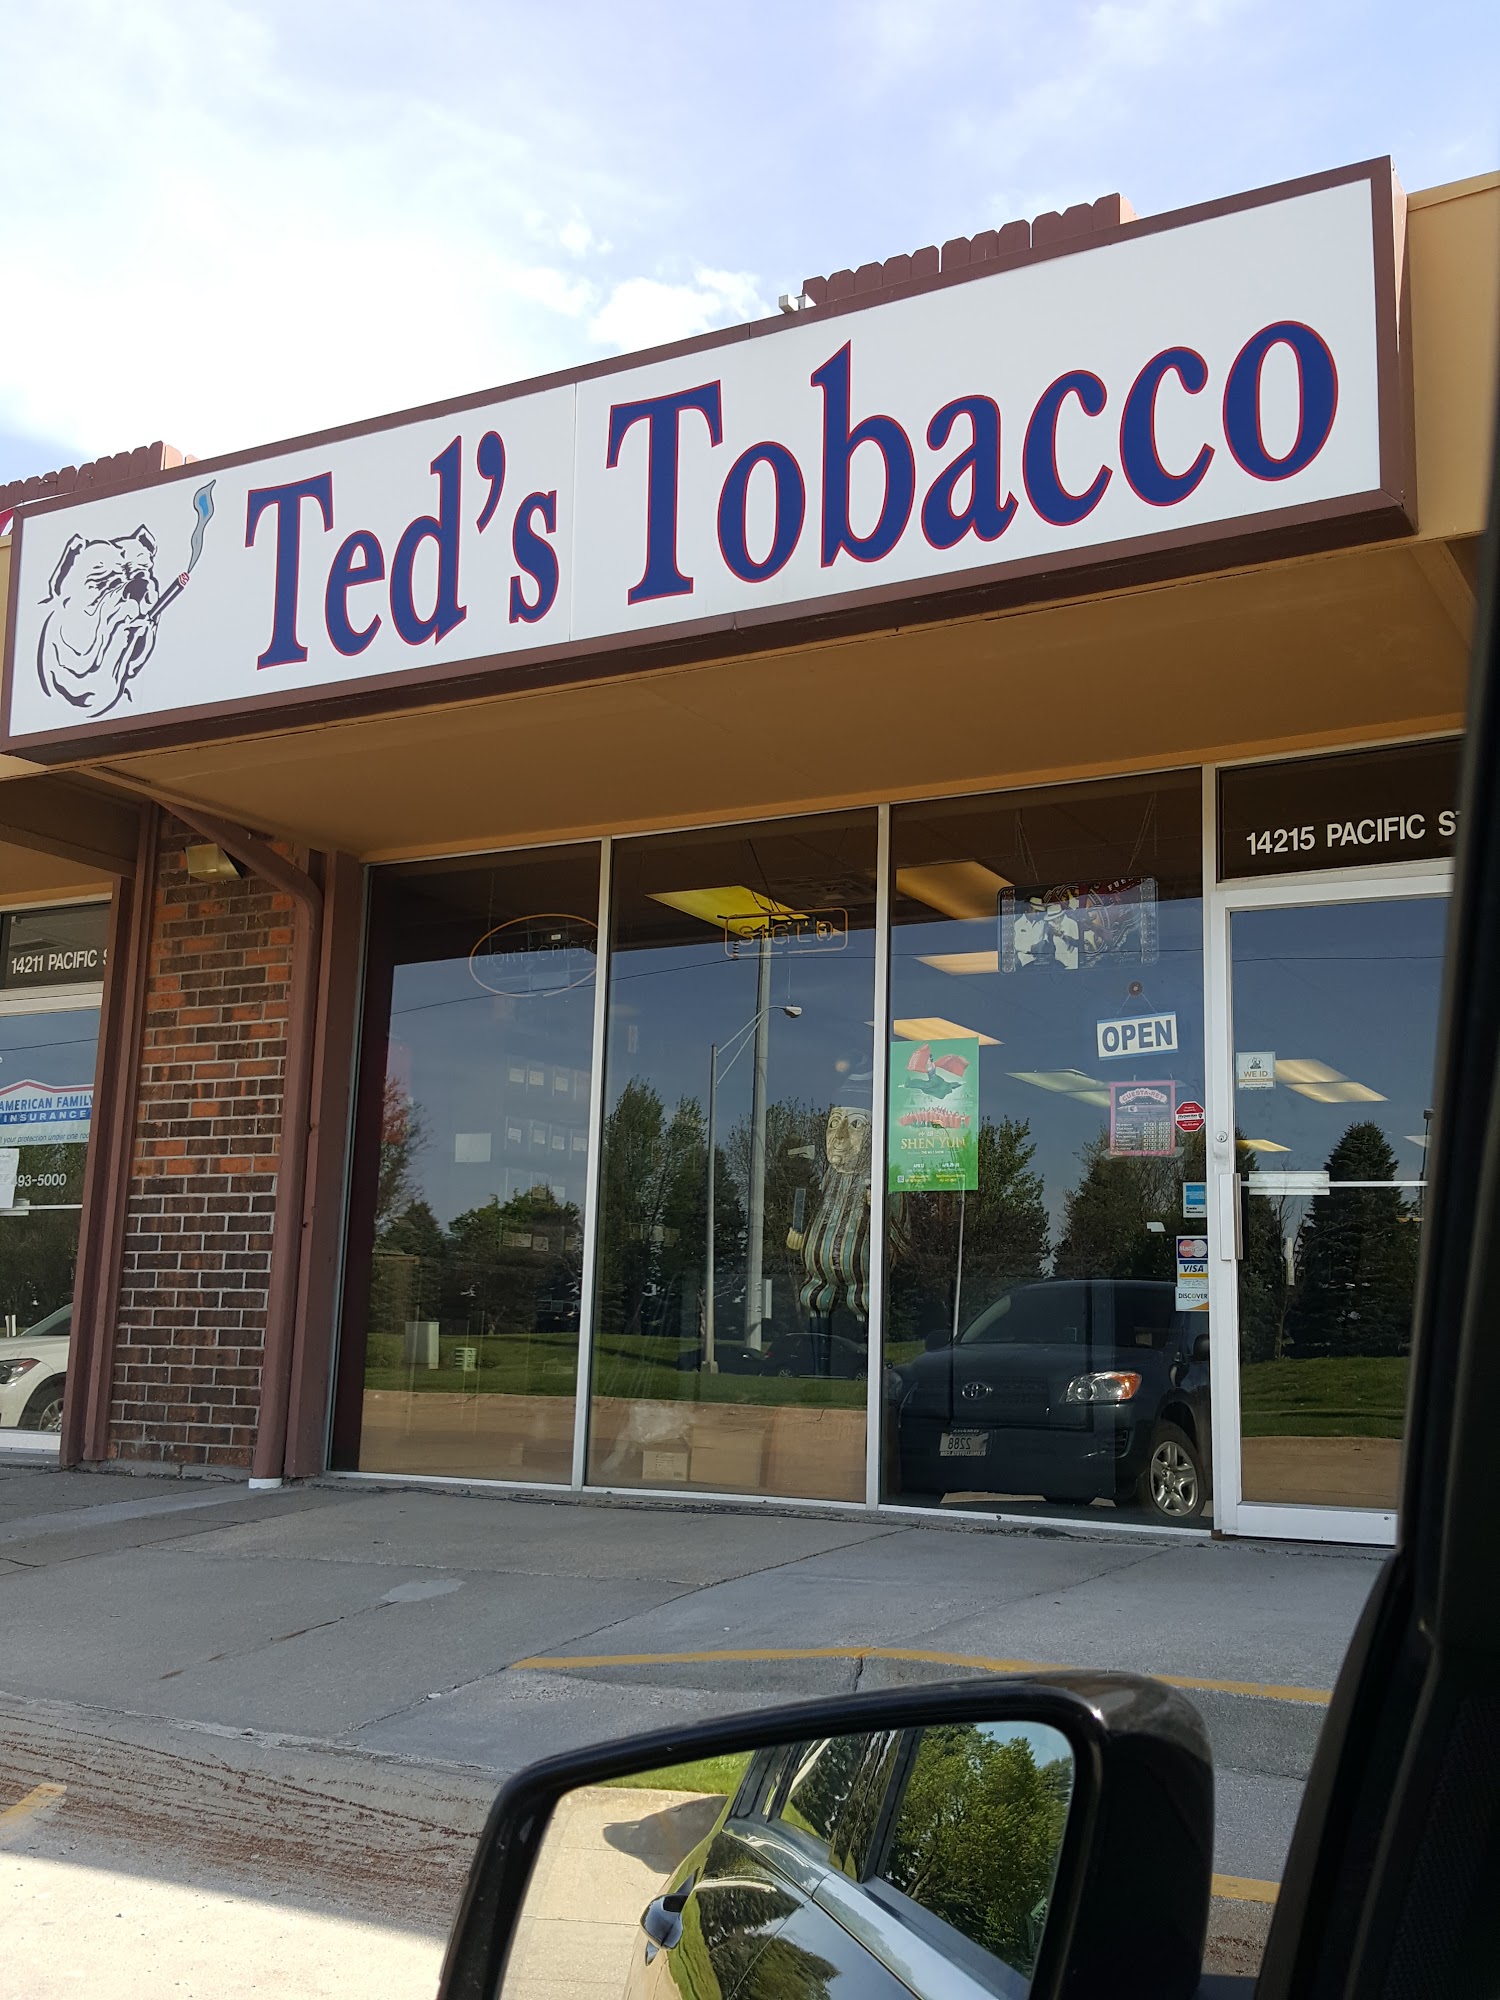 Ted's Tobacco